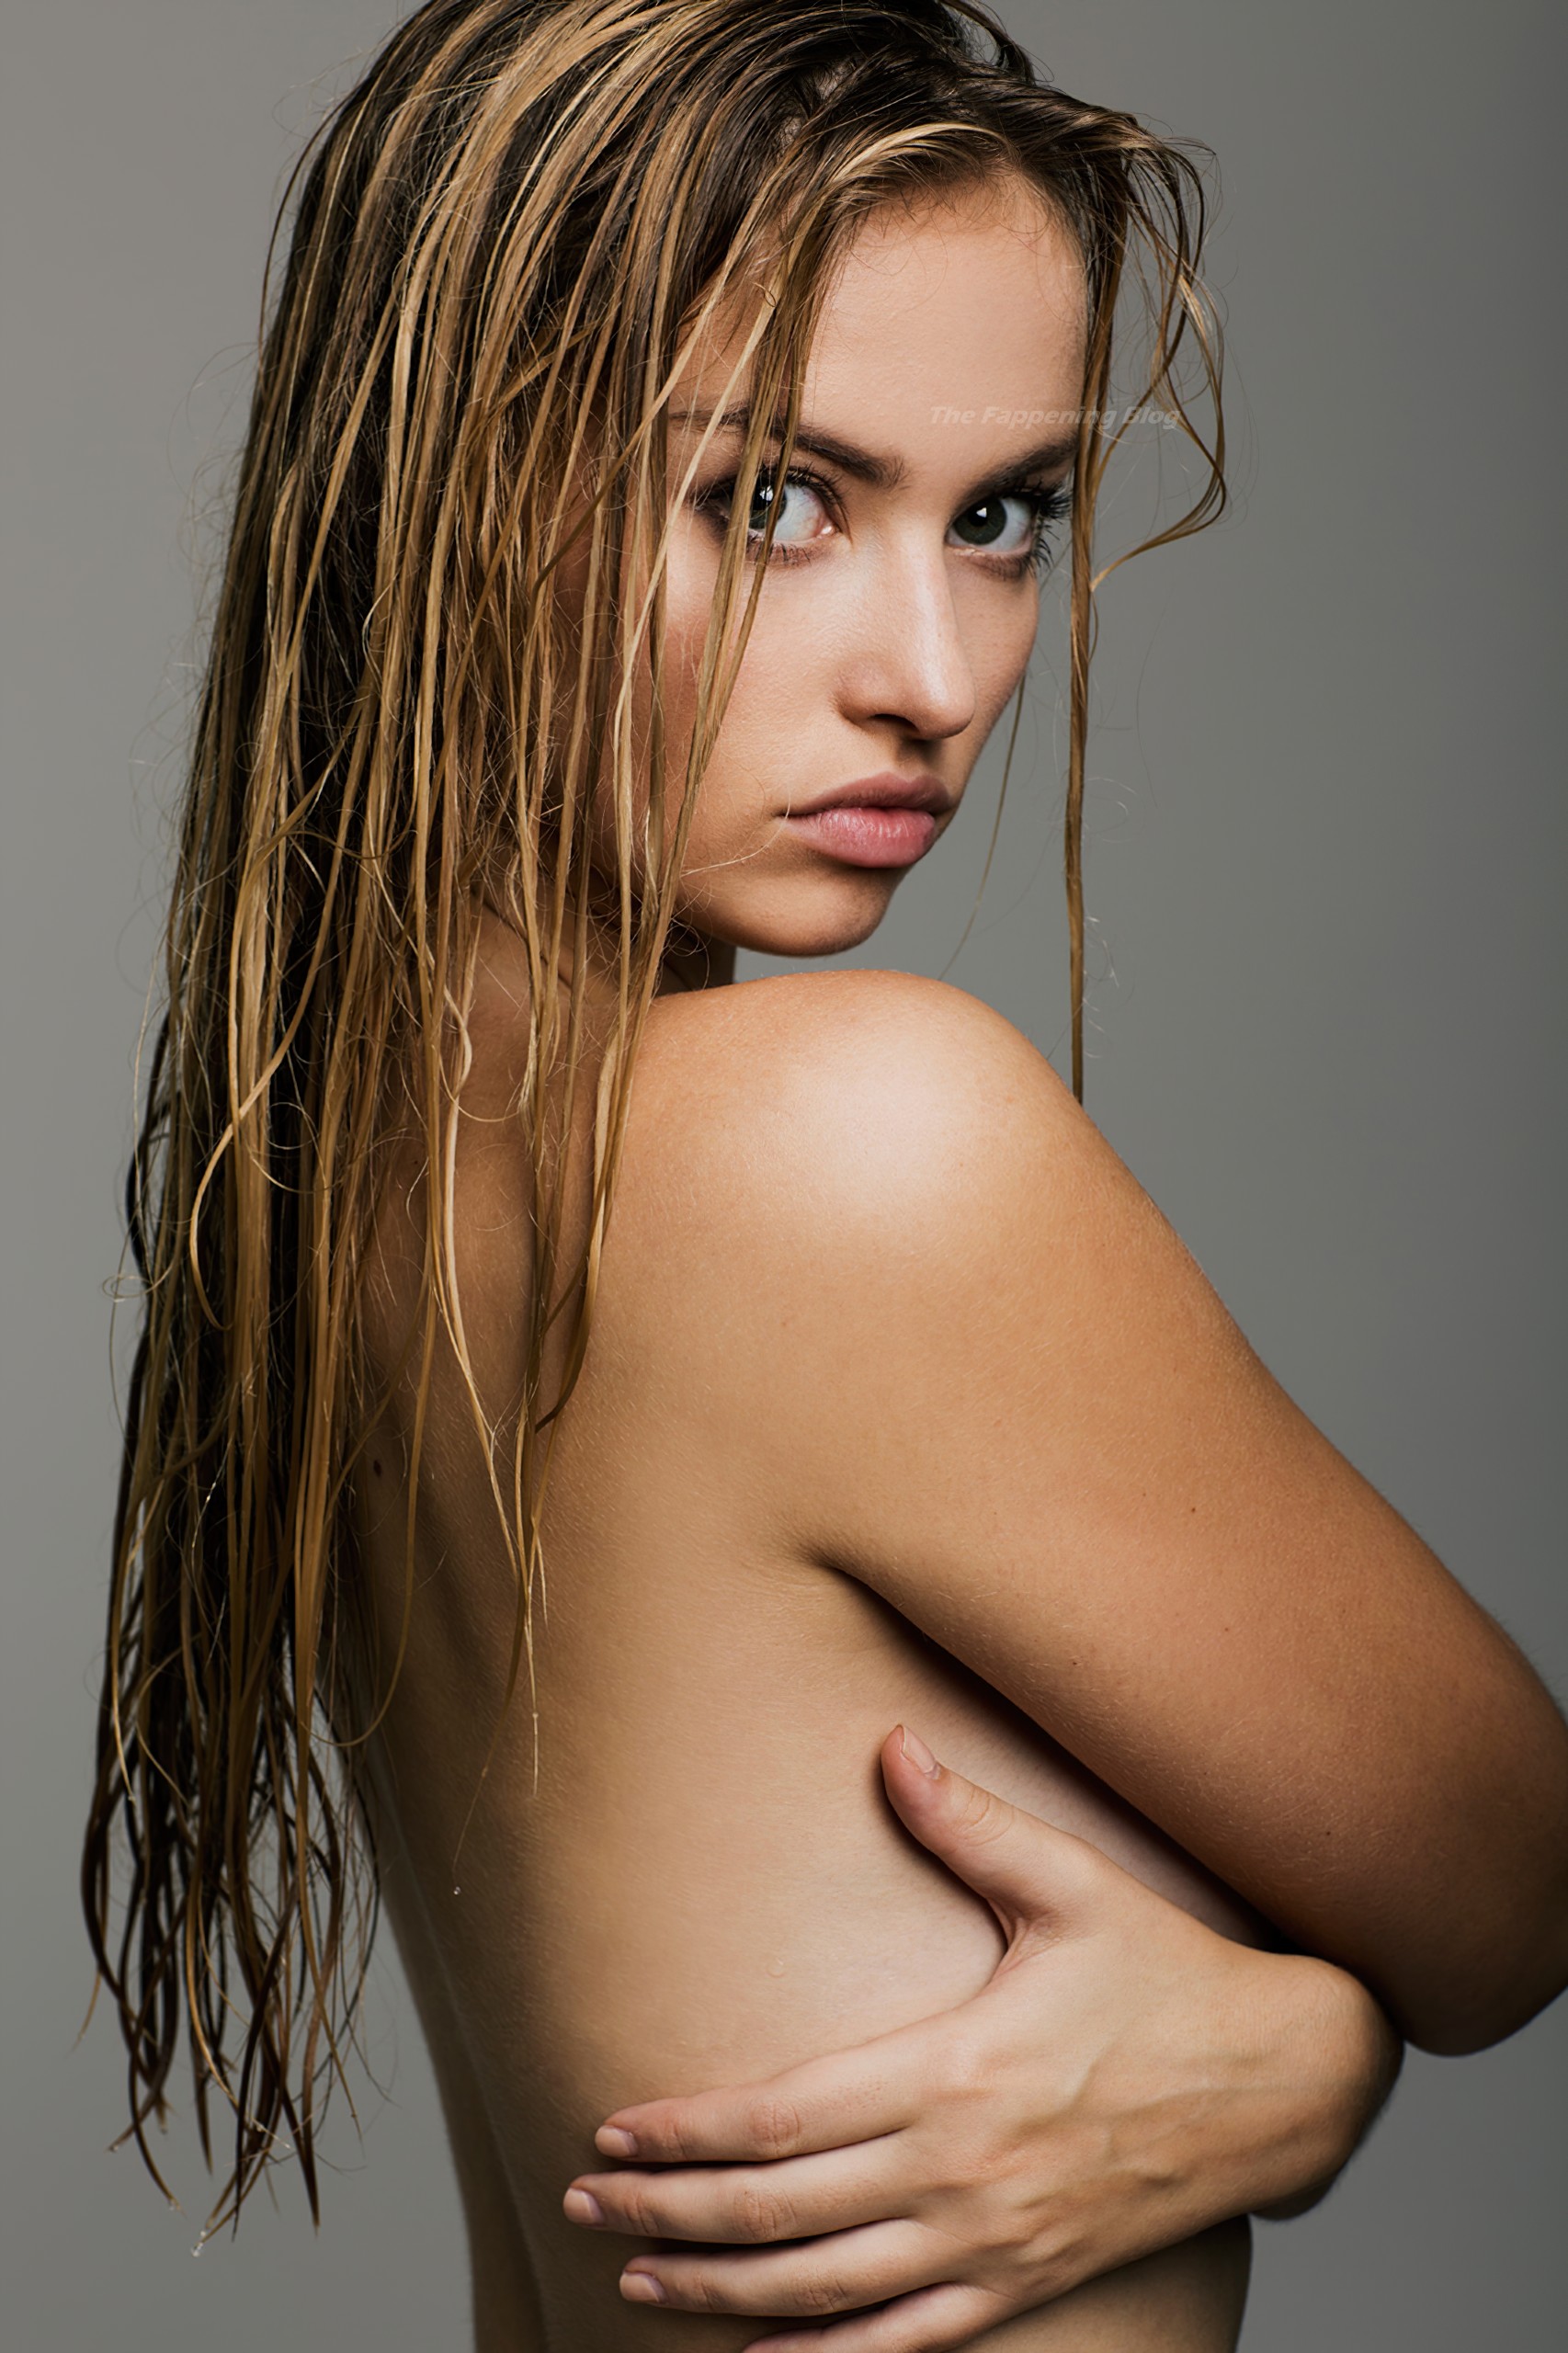 Check out Taylor Justine Howard’s nude (covered) photos by Jared Thomas Koc...